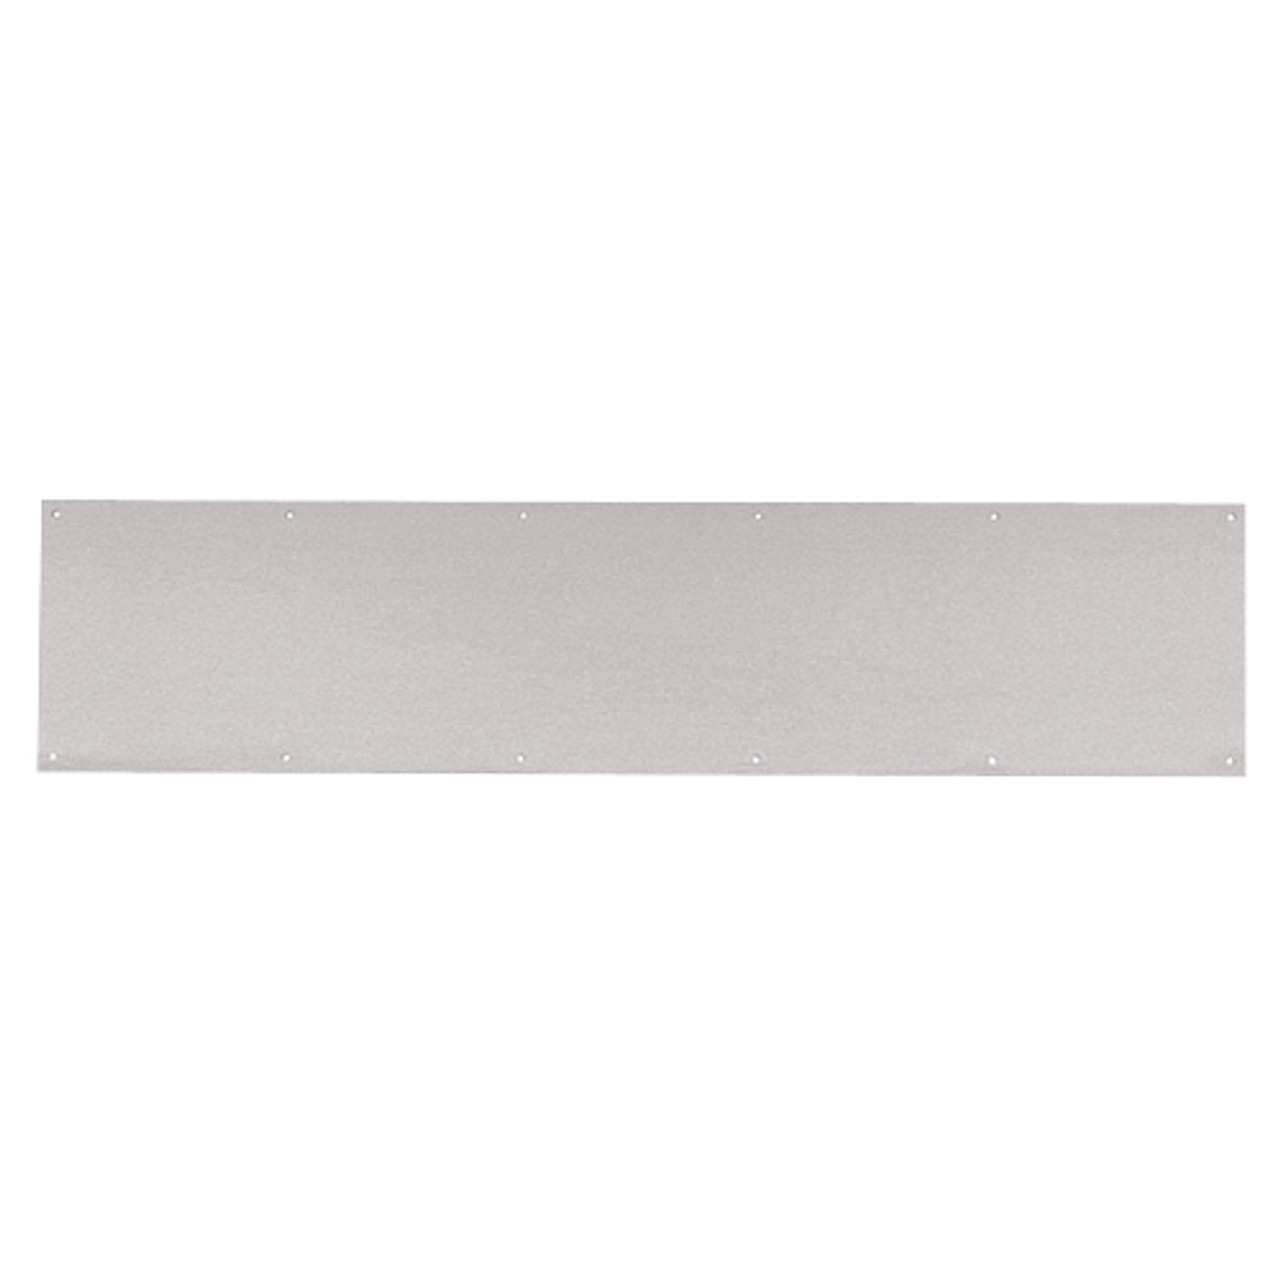 8400-US32D-18x42-B-CS Ives 8400 Series Protection Plate in Satin Stainless Steel